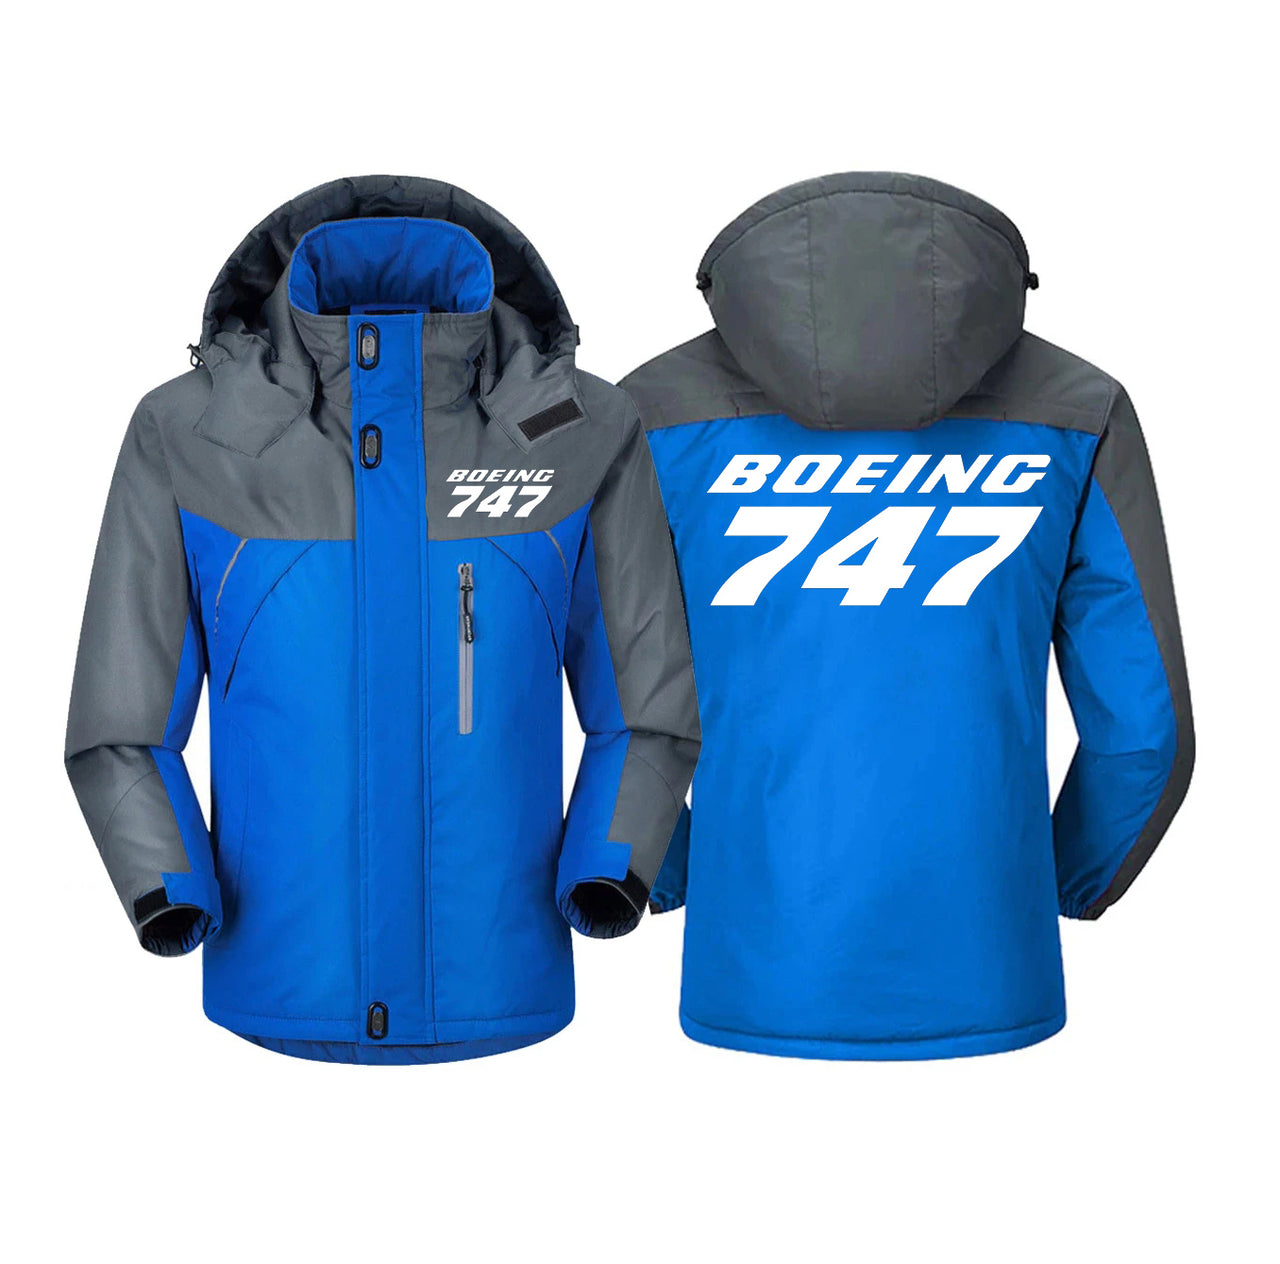 Boeing 747 & Text Designed Thick Winter Jackets